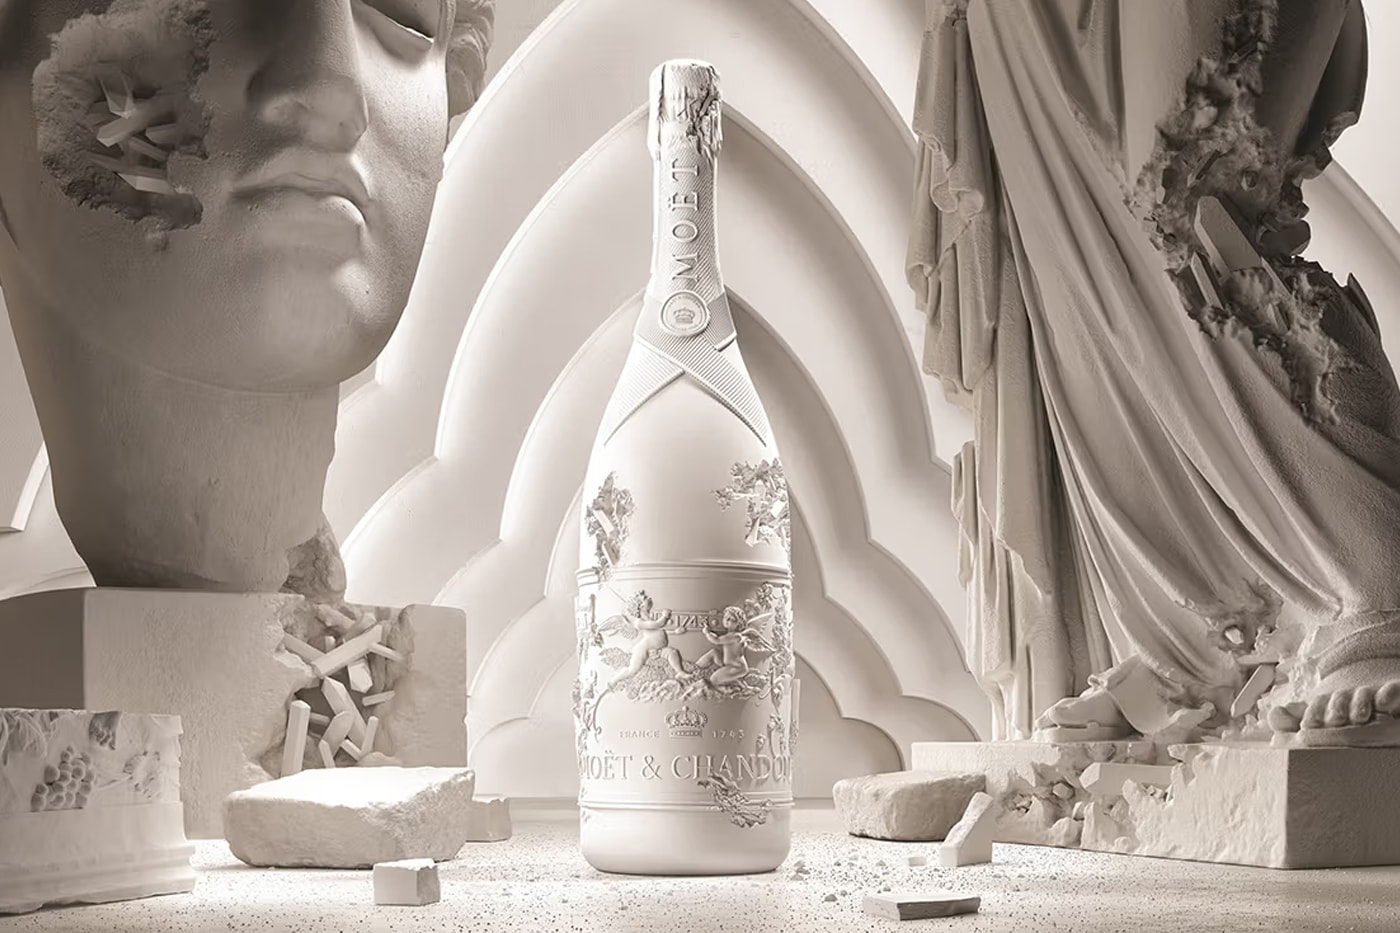 Daniel Arsham Celebrates 280th Anniversary of Moët & Chandon With Special Edition Bottle Collection Impériale Création No. 1 champagne french